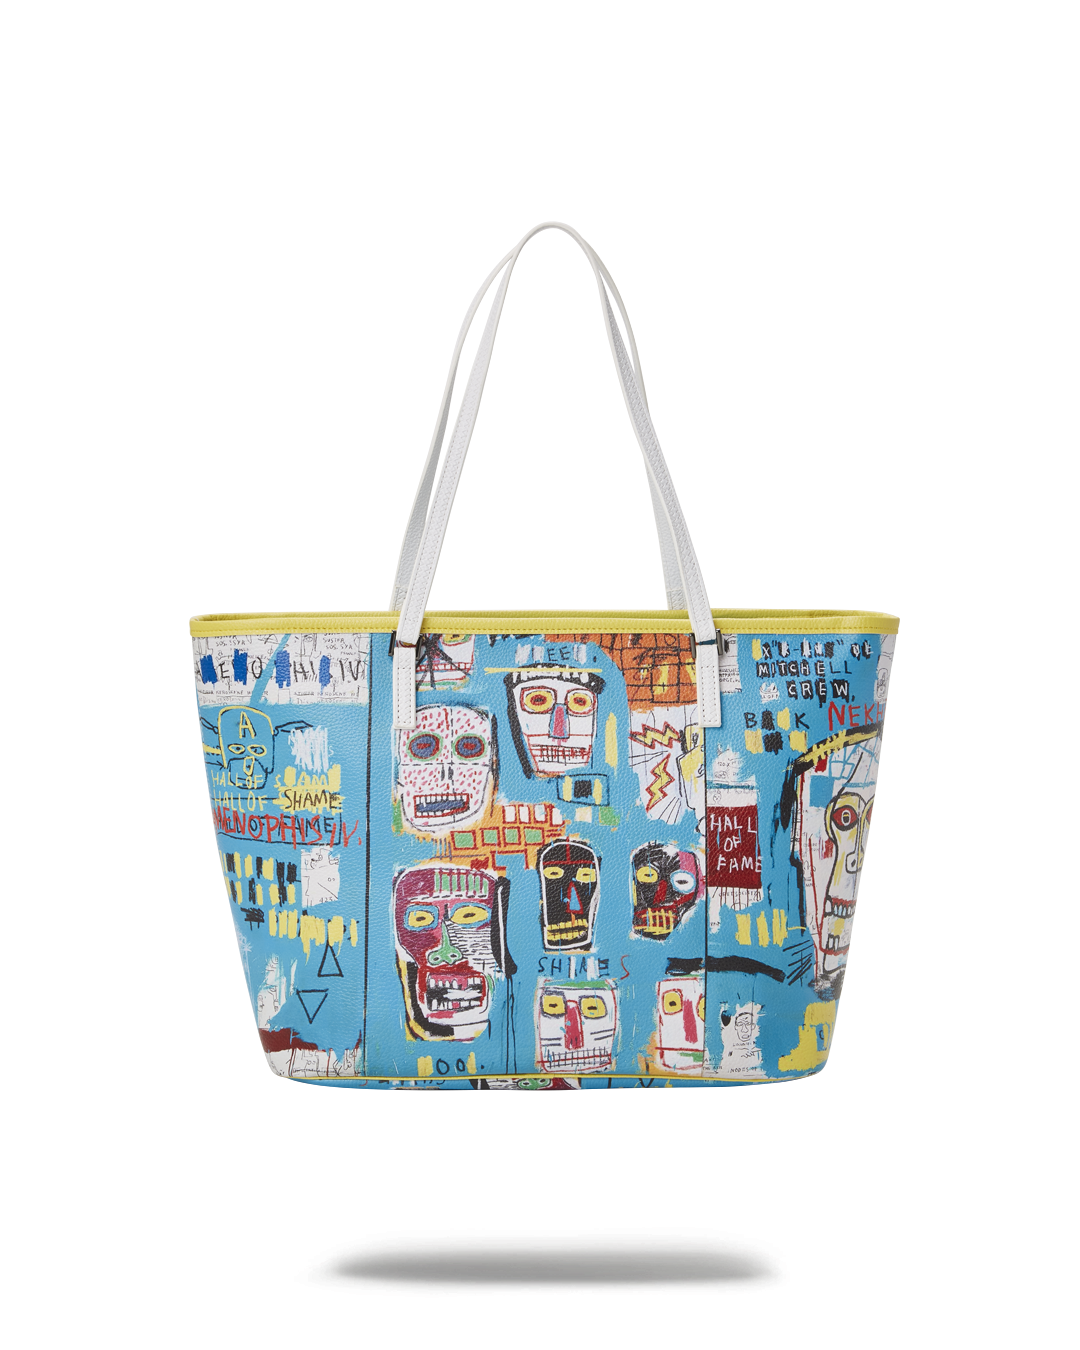 OFFICIAL BASQUIAT MITCHELL CREW 1983 TOTE